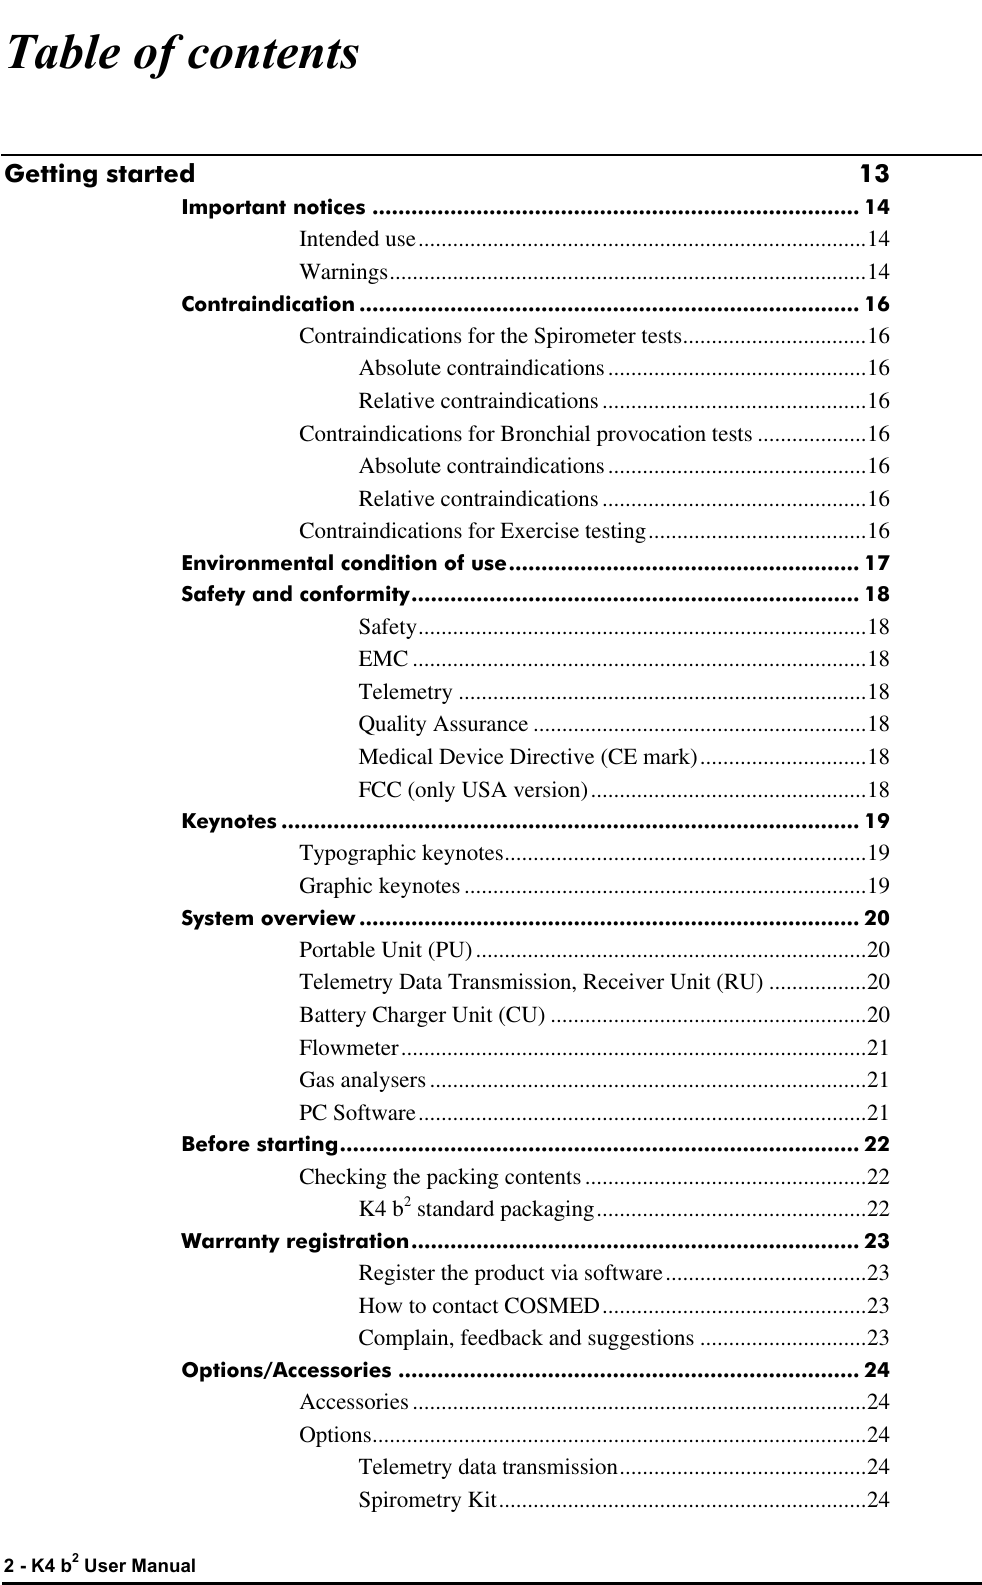  2 - K4 b2 User Manual Table of contents Getting started 13 Important notices ........................................................................... 14 Intended use..............................................................................14 Warnings...................................................................................14 Contraindication ............................................................................. 16 Contraindications for the Spirometer tests................................16 Absolute contraindications.............................................16 Relative contraindications..............................................16 Contraindications for Bronchial provocation tests ...................16 Absolute contraindications.............................................16 Relative contraindications..............................................16 Contraindications for Exercise testing......................................16 Environmental condition of use...................................................... 17 Safety and conformity..................................................................... 18 Safety..............................................................................18 EMC ...............................................................................18 Telemetry .......................................................................18 Quality Assurance ..........................................................18 Medical Device Directive (CE mark).............................18 FCC (only USA version)................................................18 Keynotes ......................................................................................... 19 Typographic keynotes...............................................................19 Graphic keynotes ......................................................................19 System overview ............................................................................. 20 Portable Unit (PU)....................................................................20 Telemetry Data Transmission, Receiver Unit (RU) .................20 Battery Charger Unit (CU) .......................................................20 Flowmeter.................................................................................21 Gas analysers............................................................................21 PC Software..............................................................................21 Before starting................................................................................ 22 Checking the packing contents.................................................22 K4 b2 standard packaging...............................................22 Warranty registration..................................................................... 23 Register the product via software...................................23 How to contact COSMED..............................................23 Complain, feedback and suggestions .............................23 Options/Accessories ....................................................................... 24 Accessories...............................................................................24 Options......................................................................................24 Telemetry data transmission...........................................24 Spirometry Kit................................................................24 